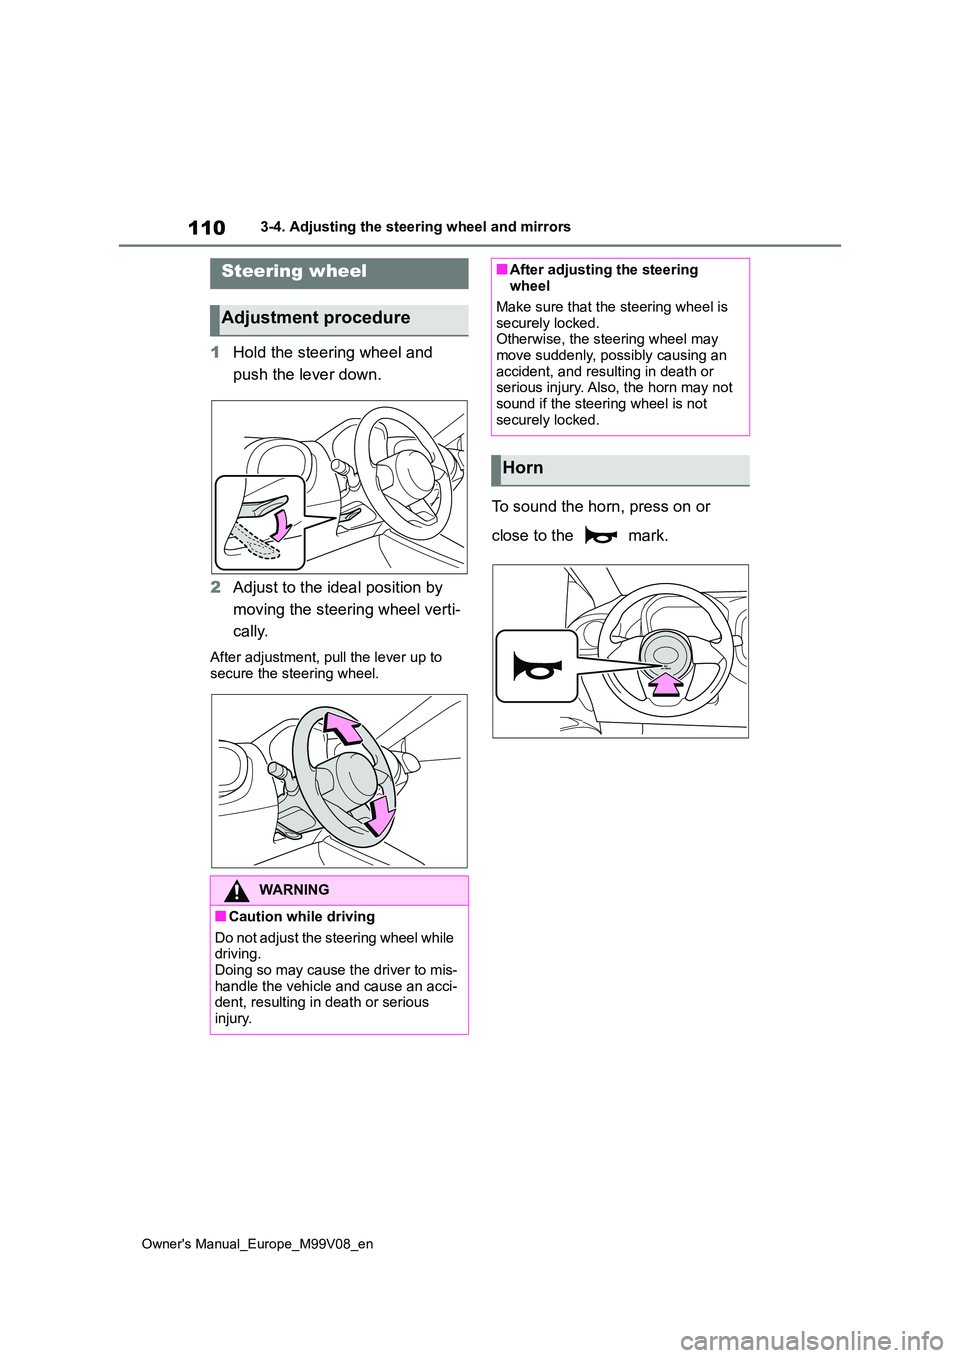 TOYOTA AYGO X 2022   (in English) Owners Guide 110
Owner's Manual_Europe_M99V08_en
3-4. Adjusting the steering wheel and mirrors
3-4.Adjusting  the steering  whe el an d mirrors
1Hold the steering wheel and  
push the lever down. 
2 Adjust to 